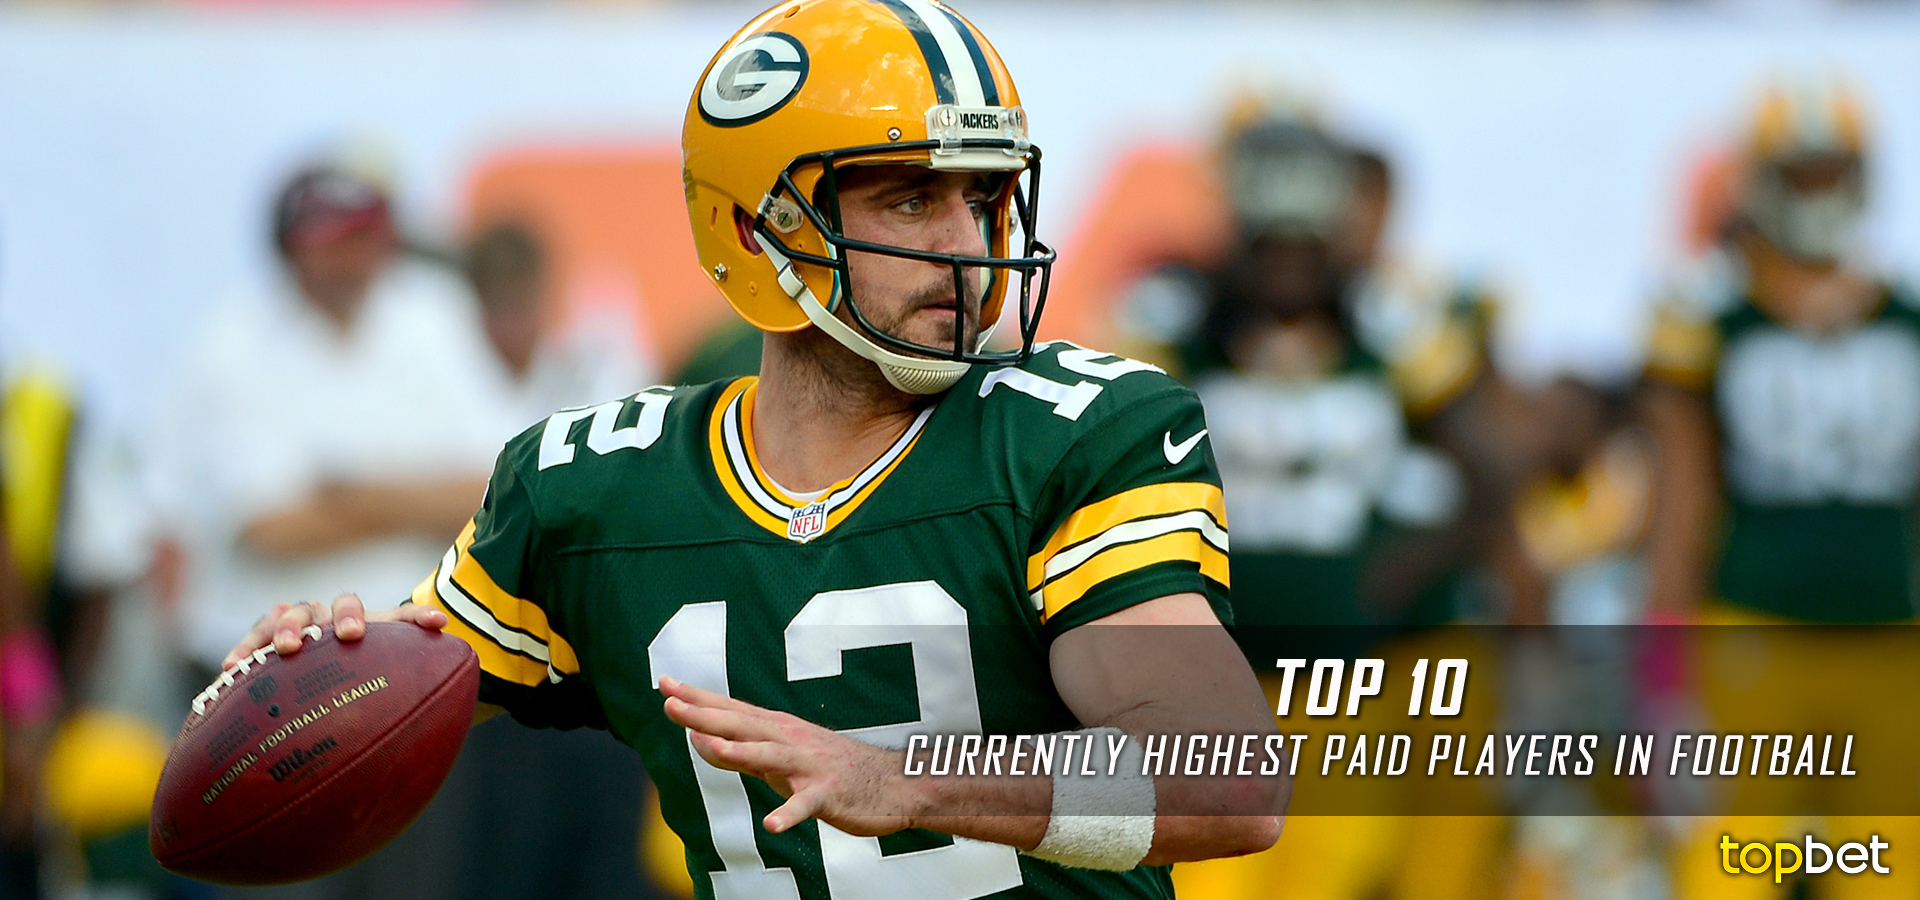 Top 10 Currently Highest Paid Players in the NFL / Football